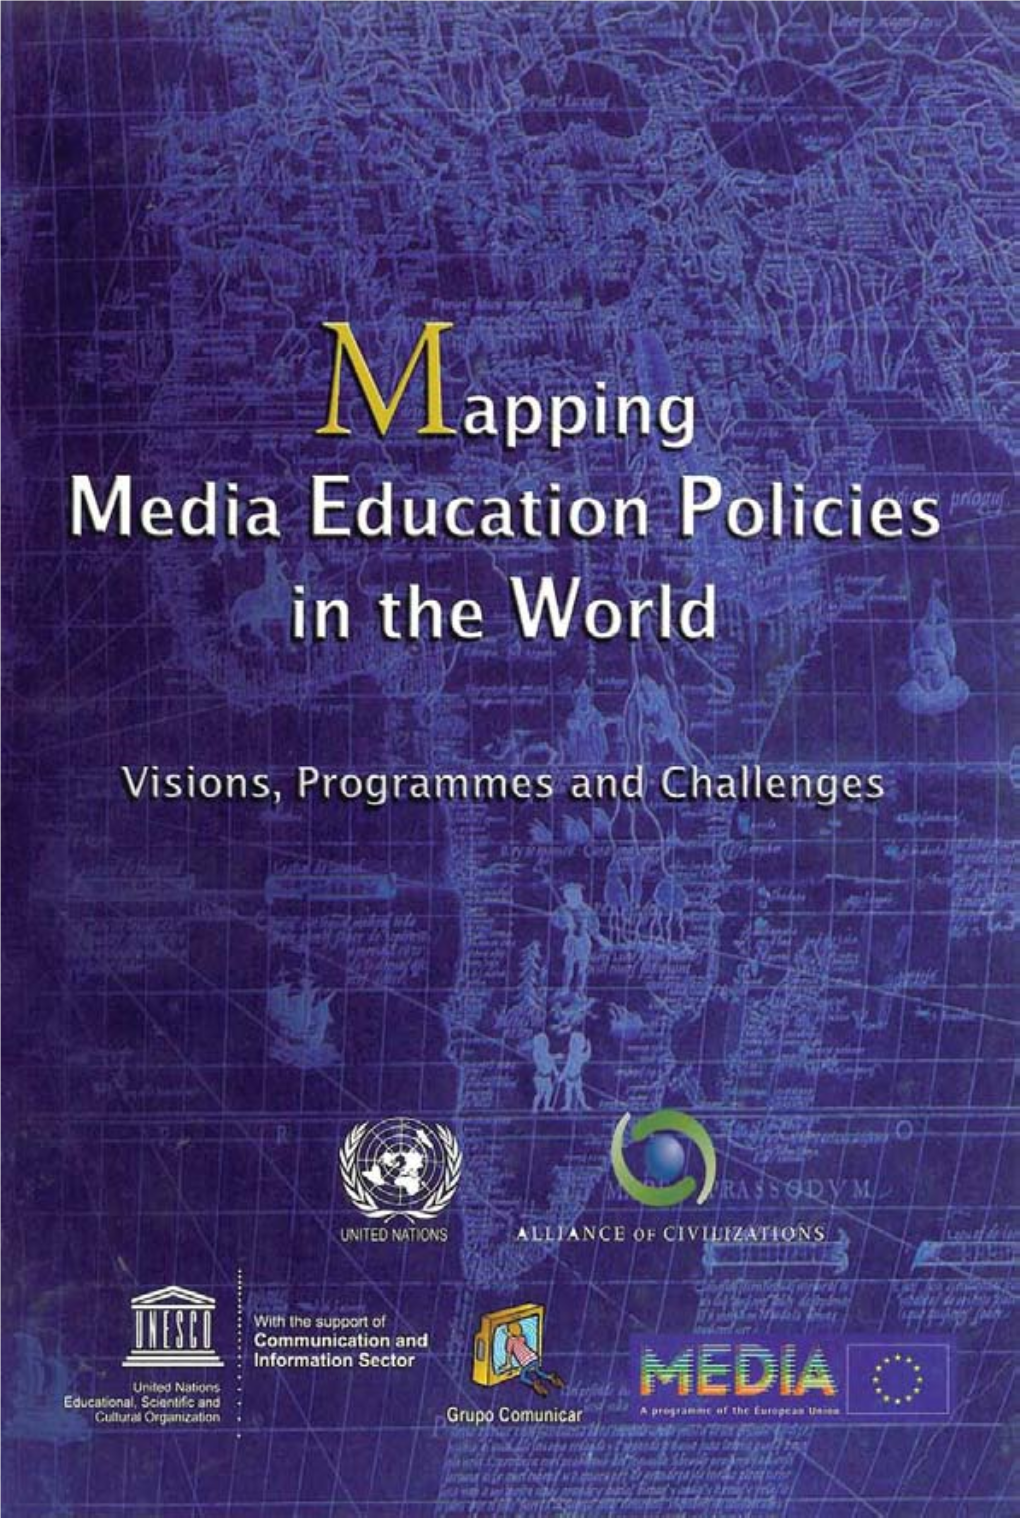 Mapping Media Education Policies in the World